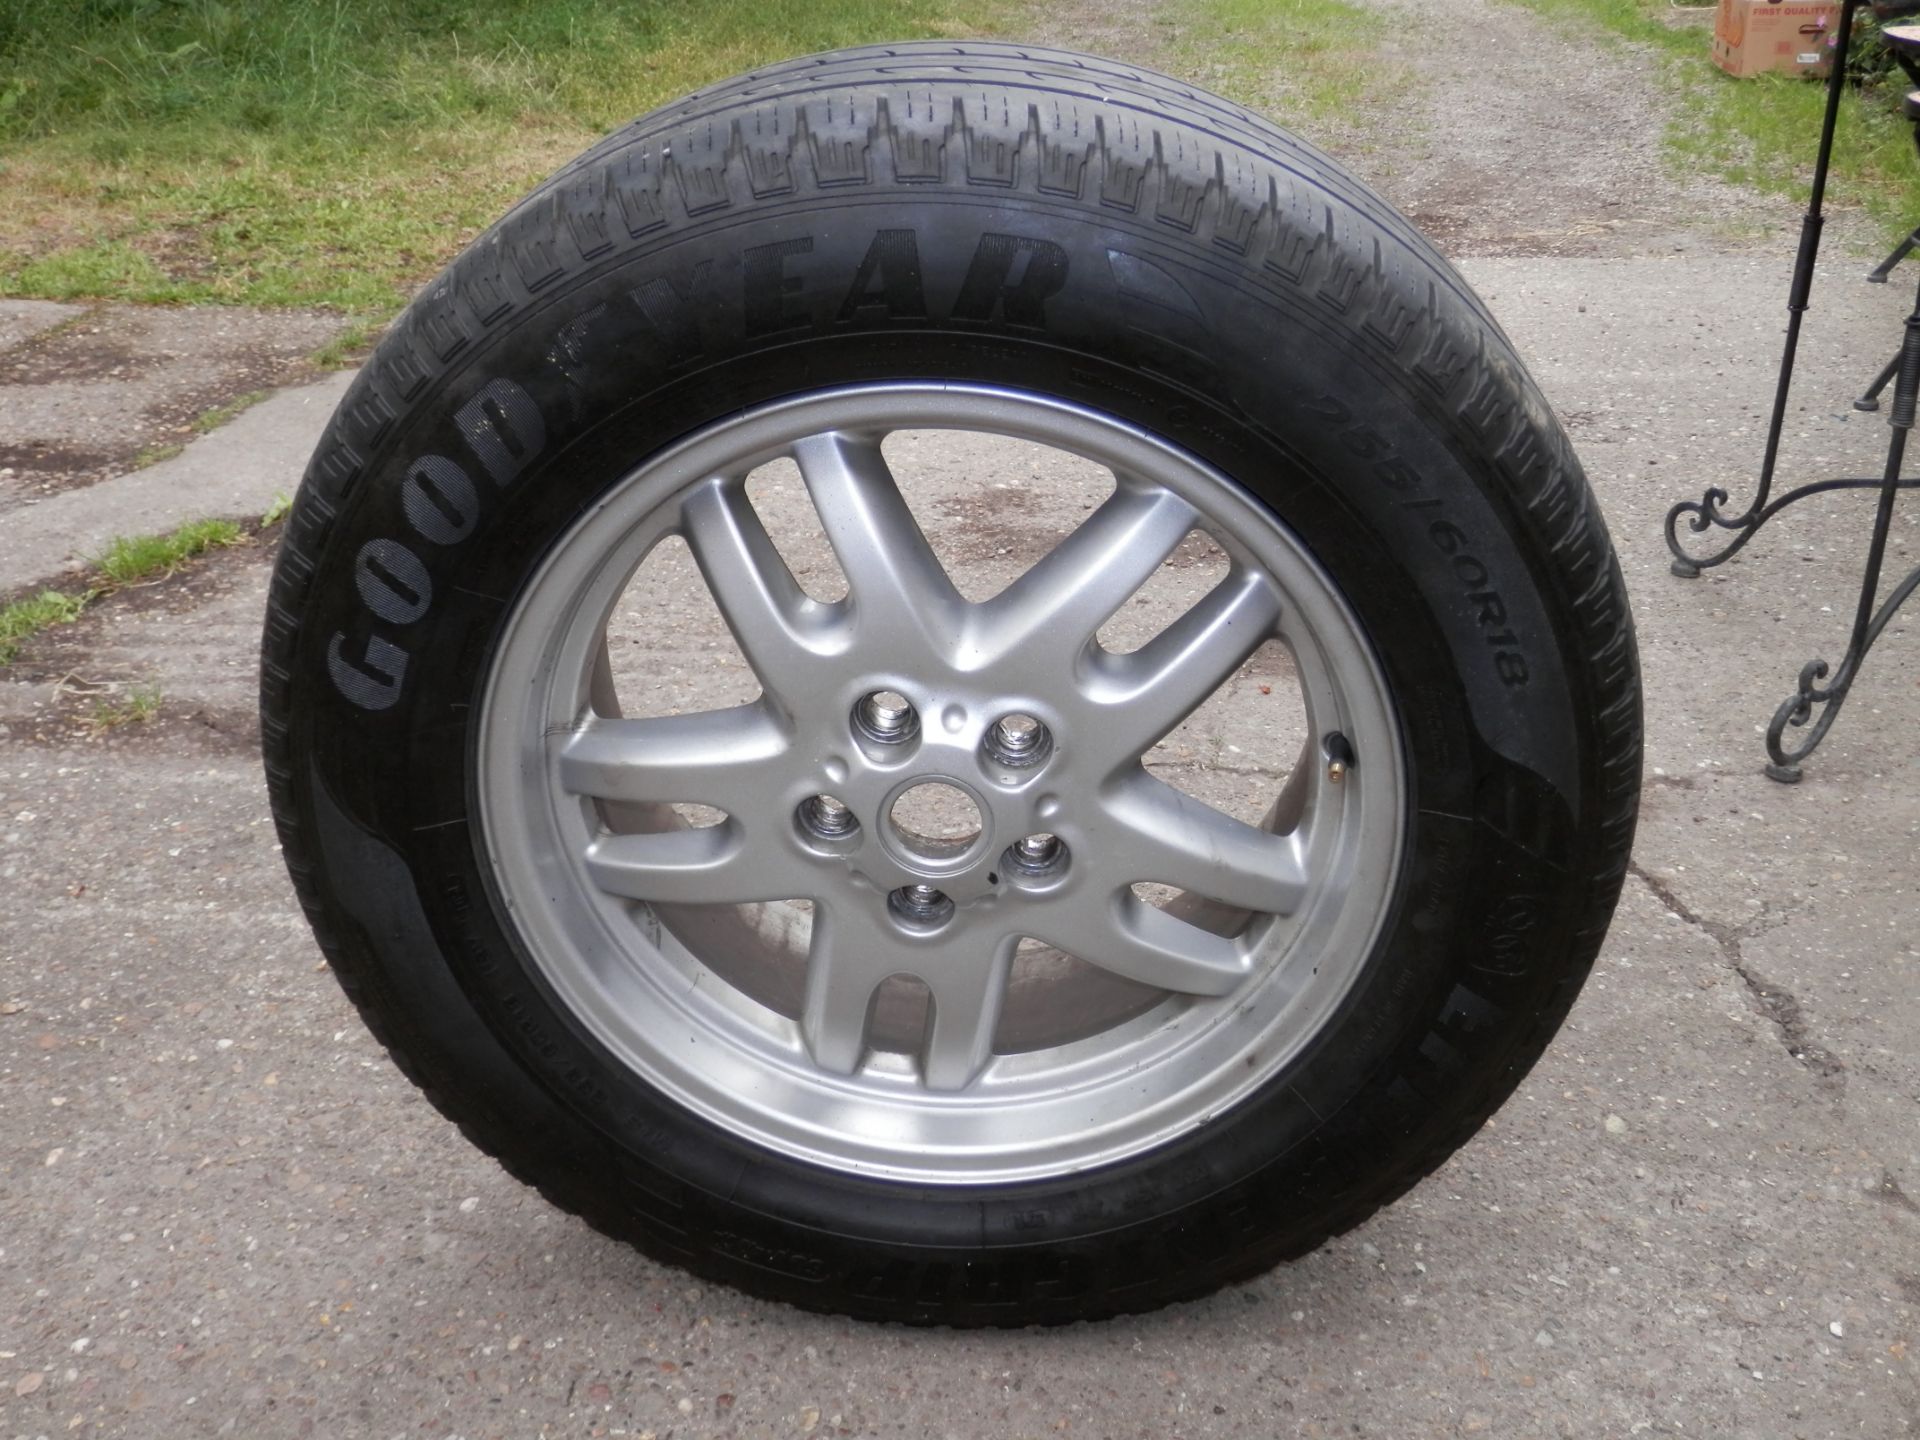 1 X RANGE ROVER VOGUE TD6 18" WHEEL & DECENT GOODYEAR TYRE. 255/60/18. FROM A 2004 CAR. FITS OTHERS